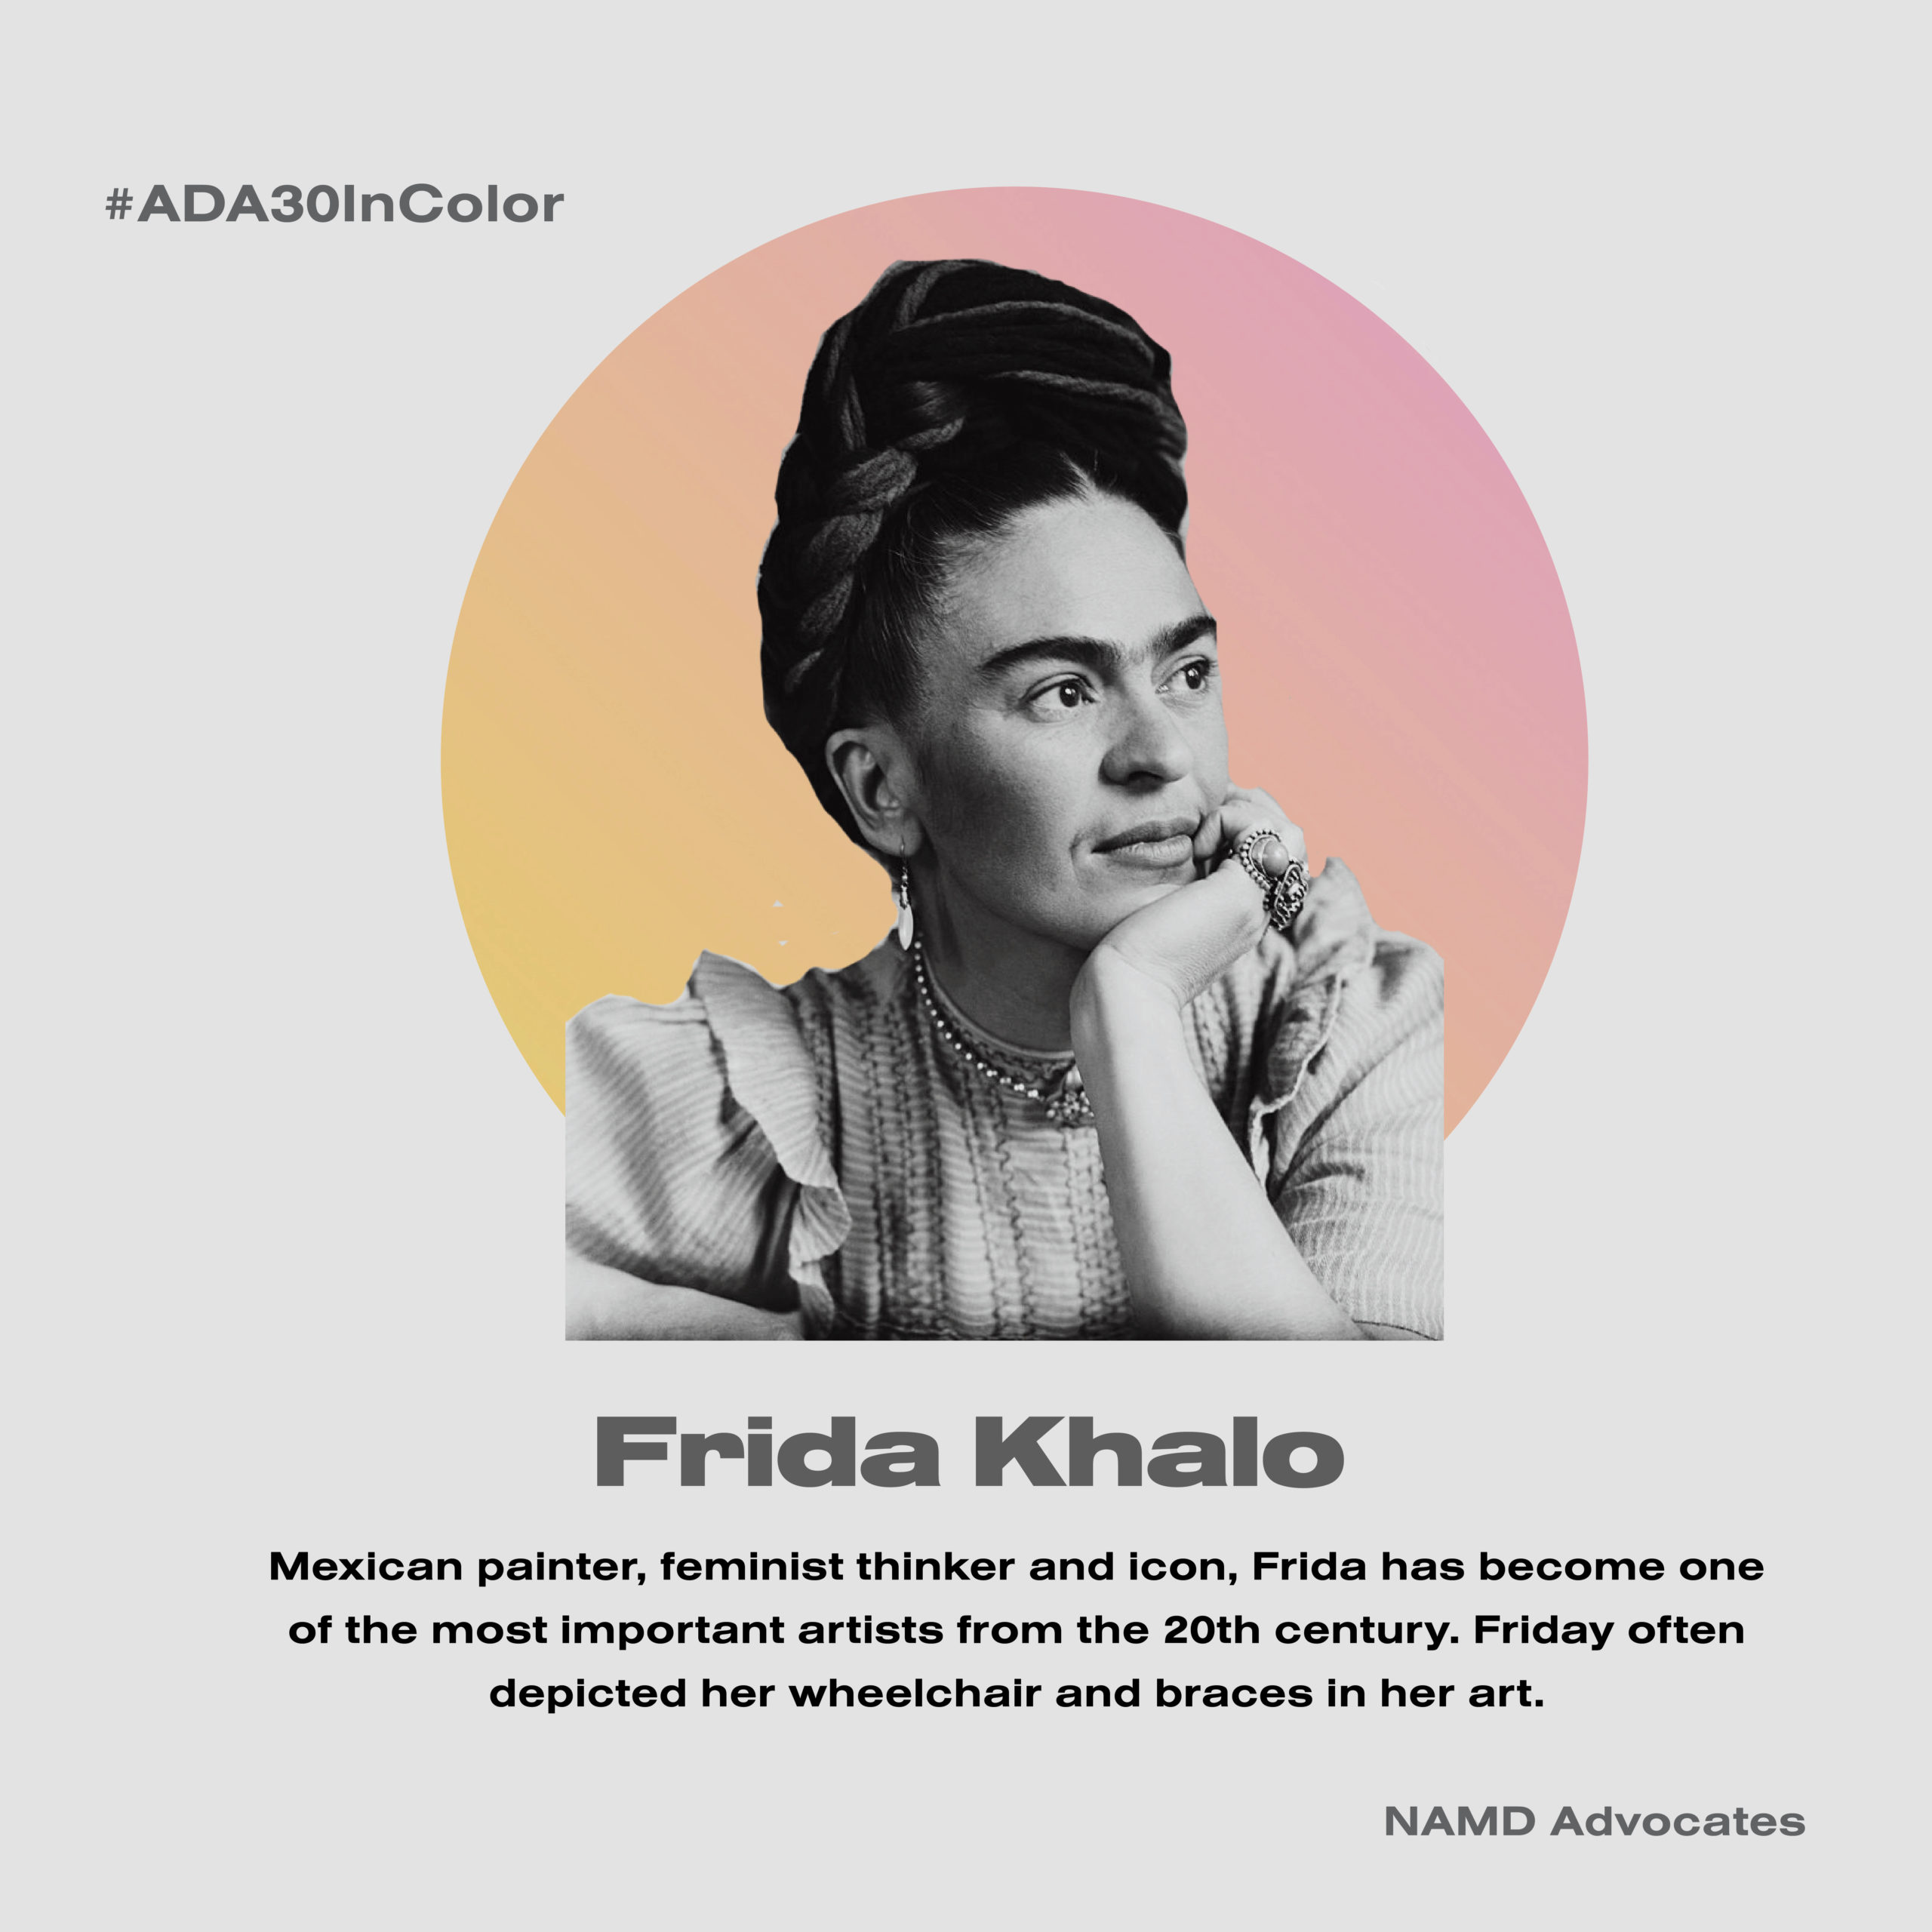 Frida Kahlo. Mexican painter, feminist thinker and icon, Frida has become one of the most important artists from the 20th century. Friday often depicted her wheelchair and braces in her art.